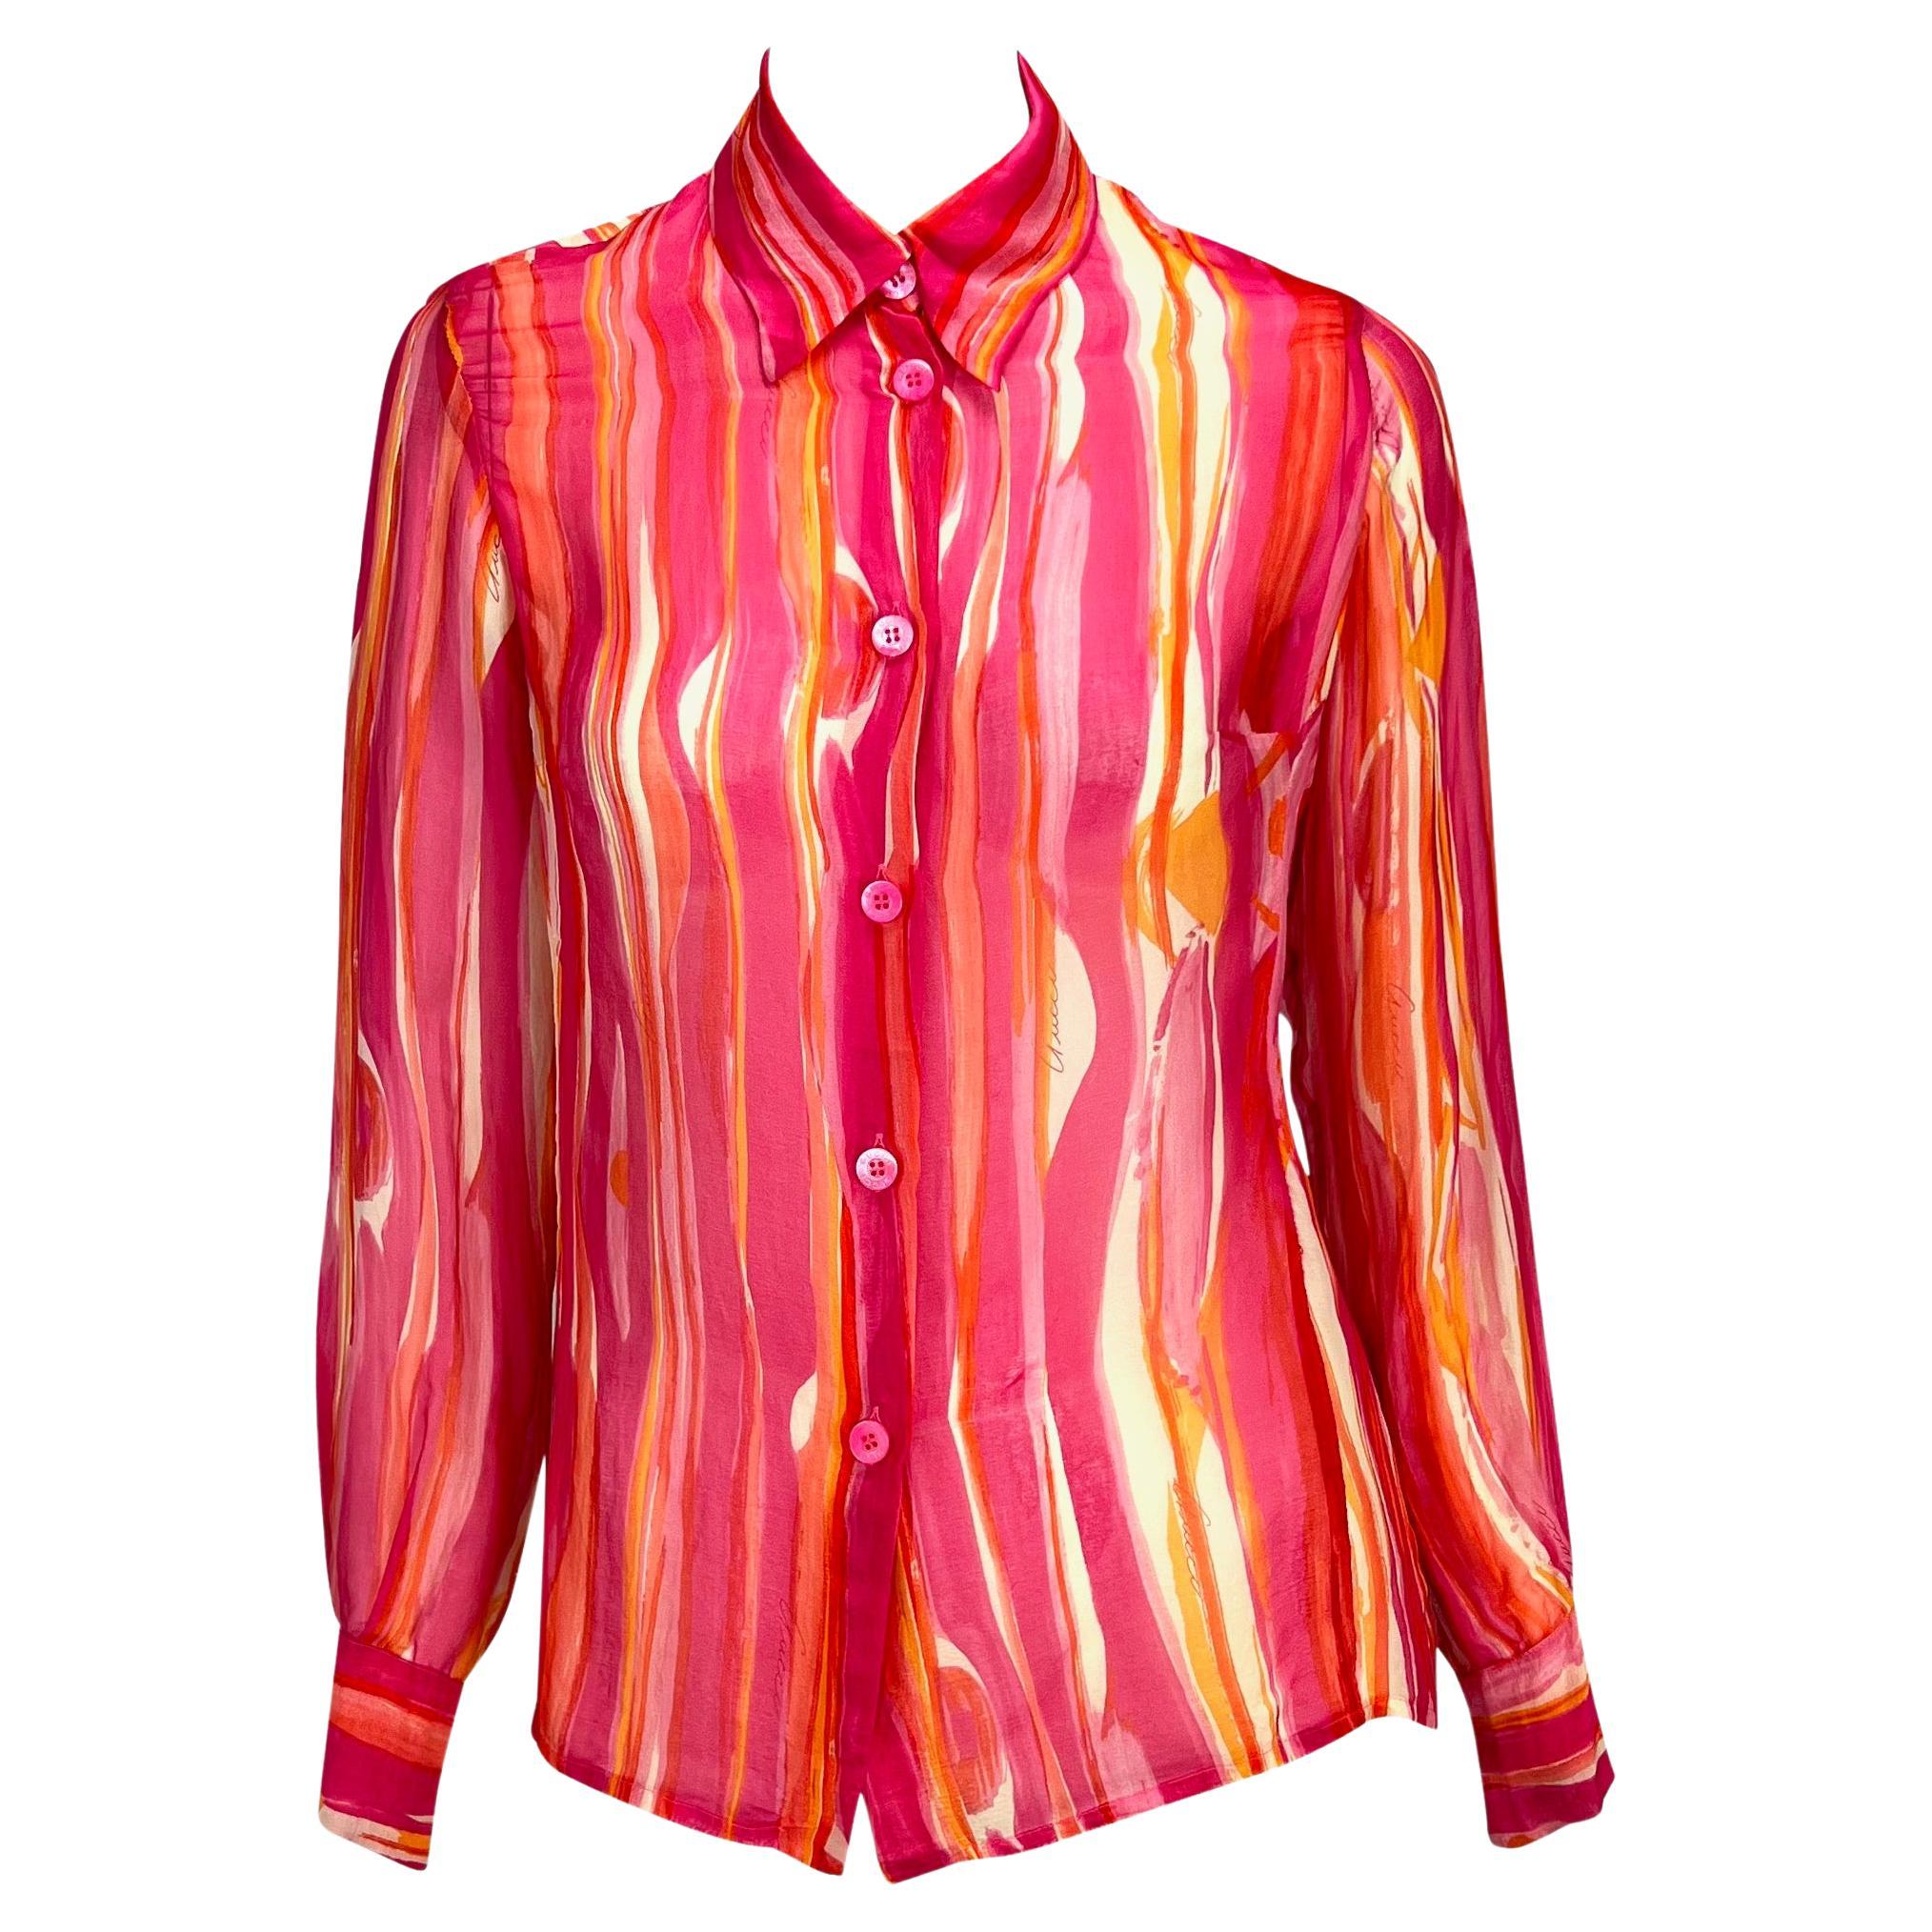 S/S 1996 Gucci by Tom Ford Pink Orange Sheer Abstract Watercolor Button Up Top